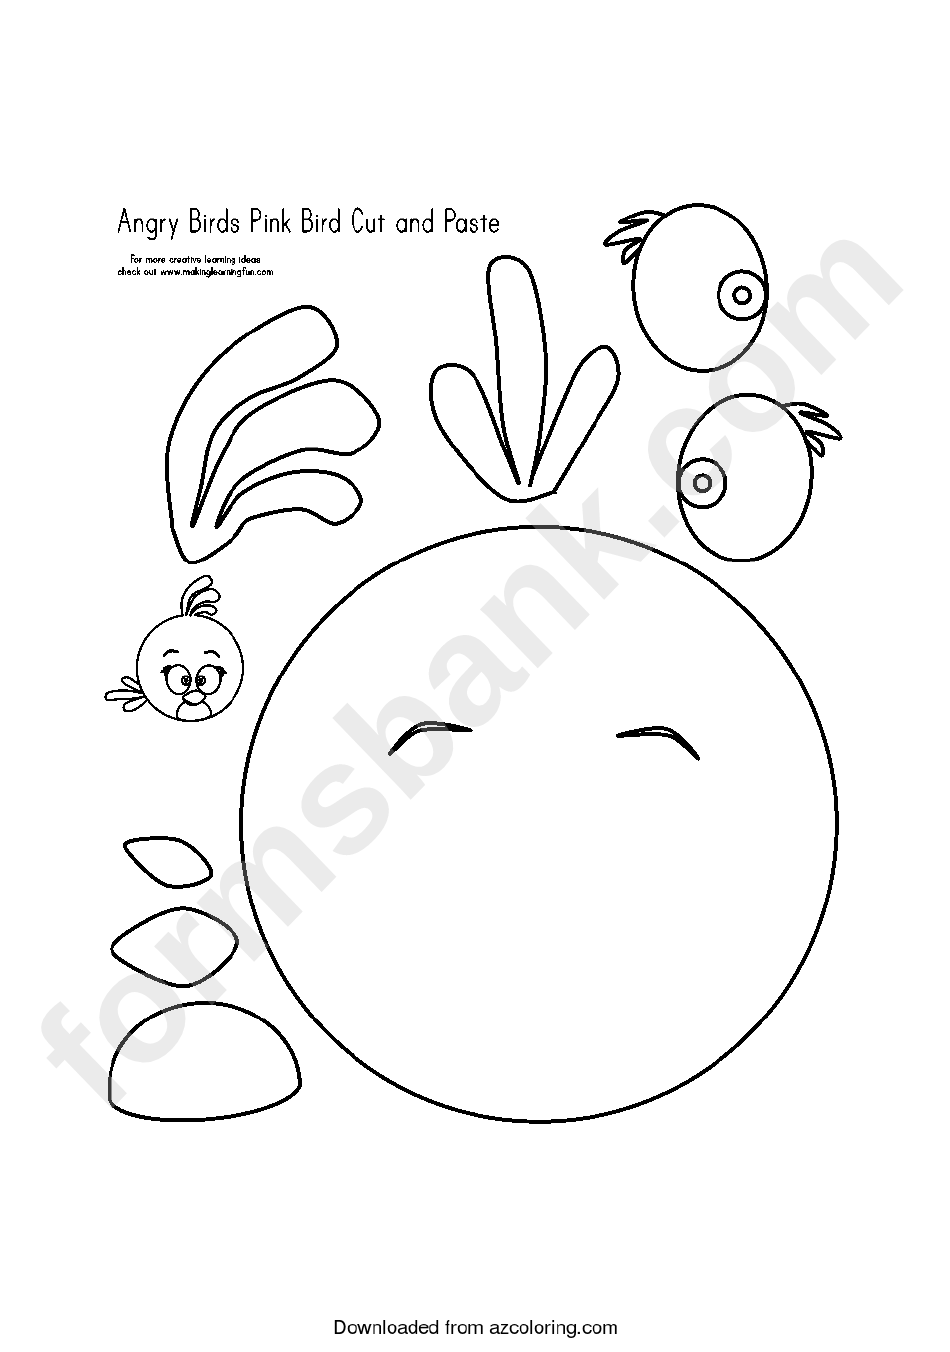 Cut-Out Angry Birds Template